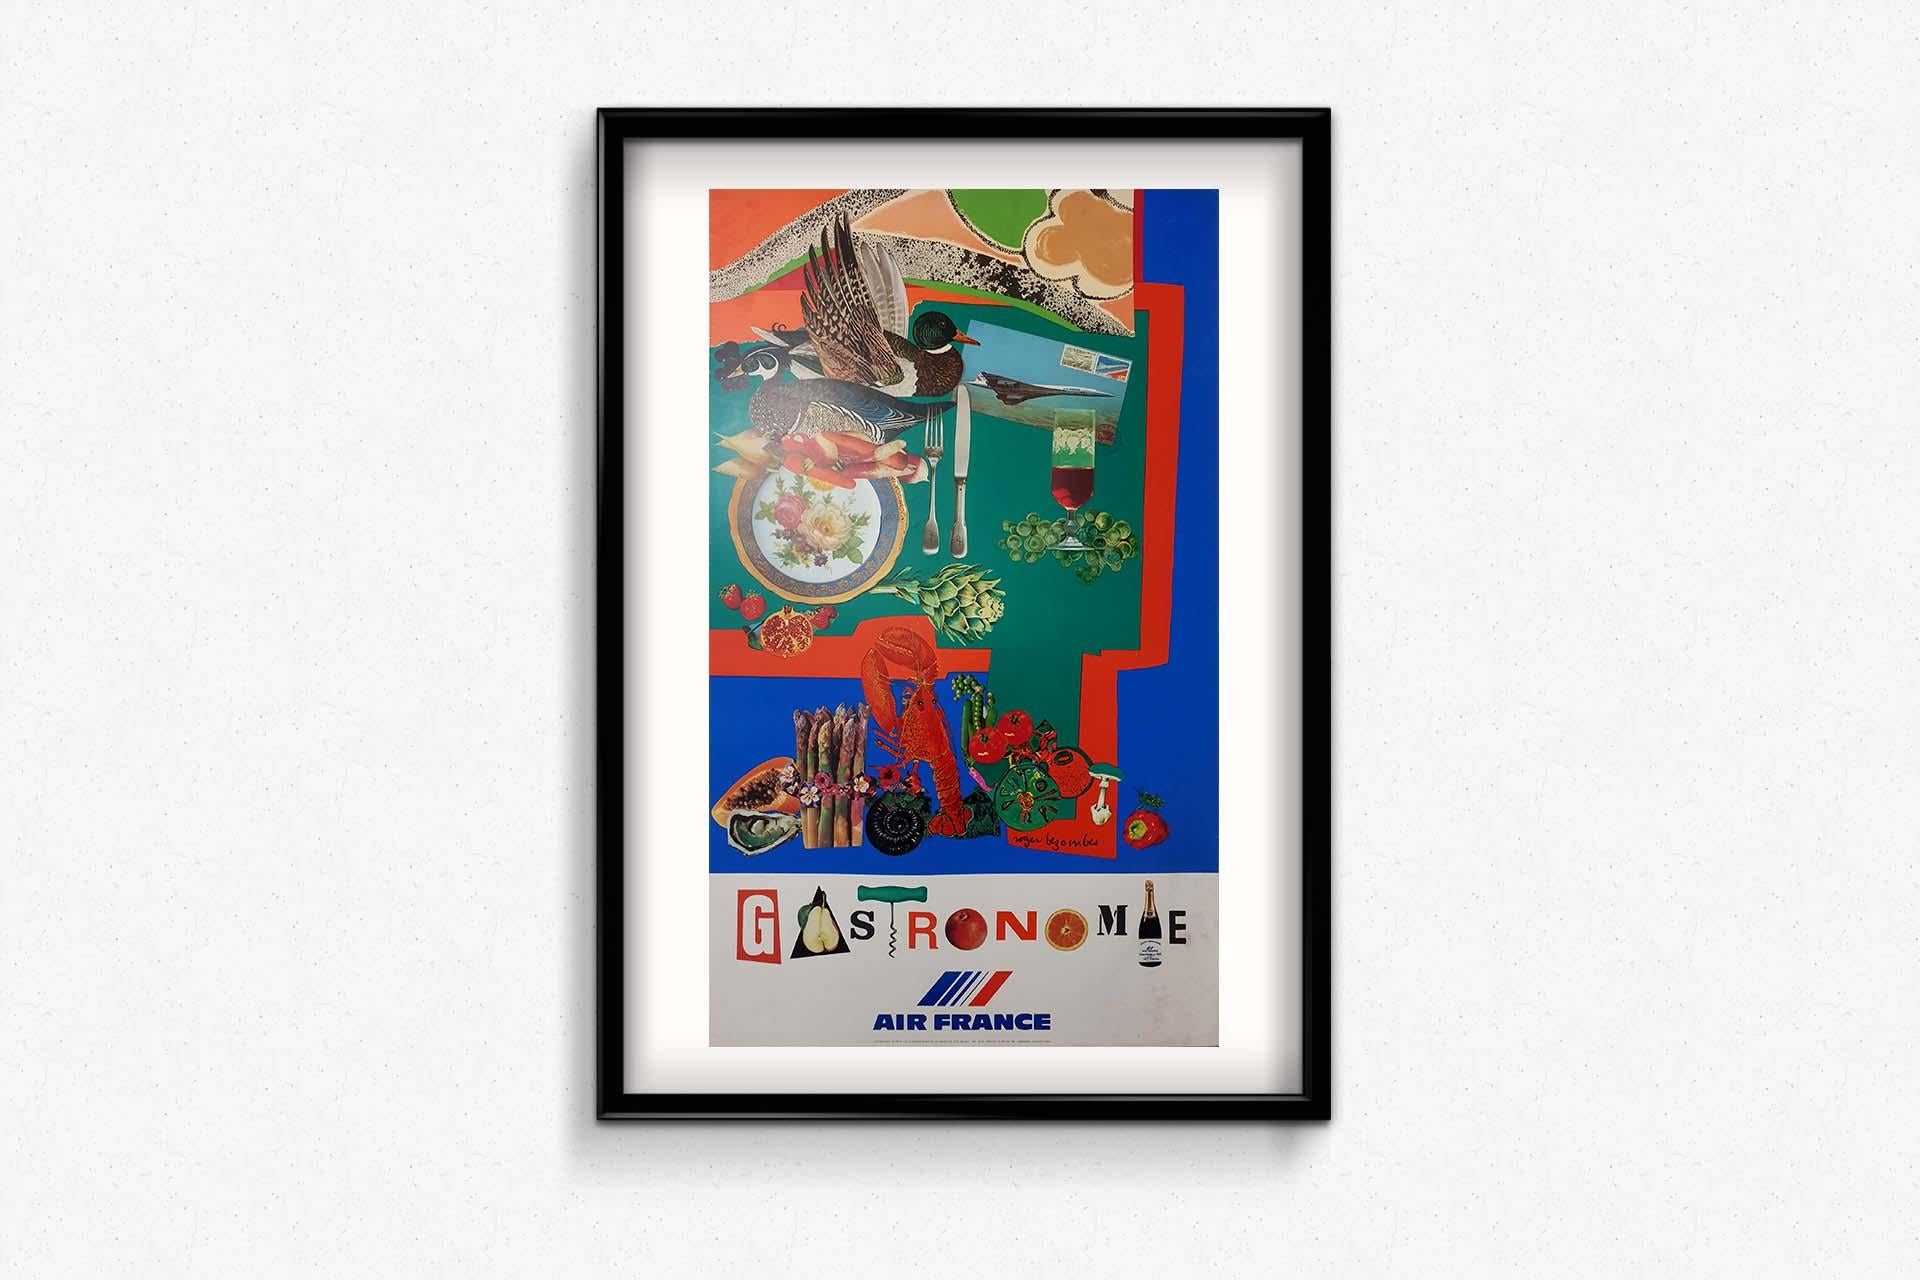 1981 Original poster by Roger Bezombes - Air France - Aviation - Gastronomy For Sale 3